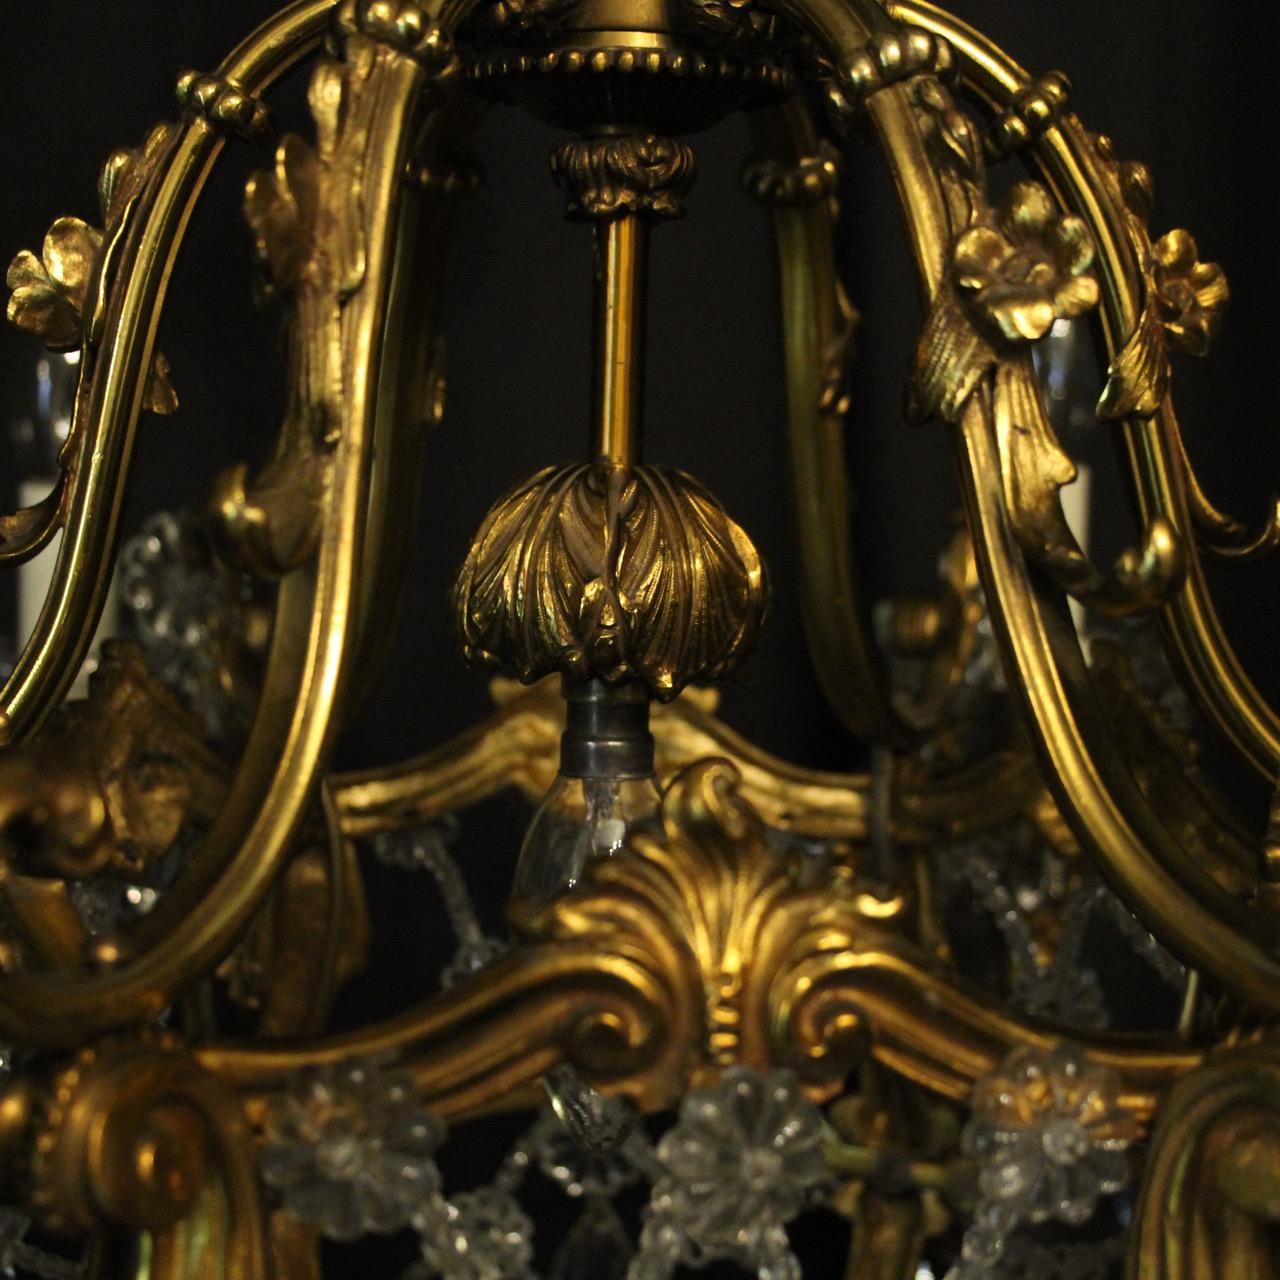 French Gilded Bronze and Crystal 19th Century Antique Chandelier For Sale 3